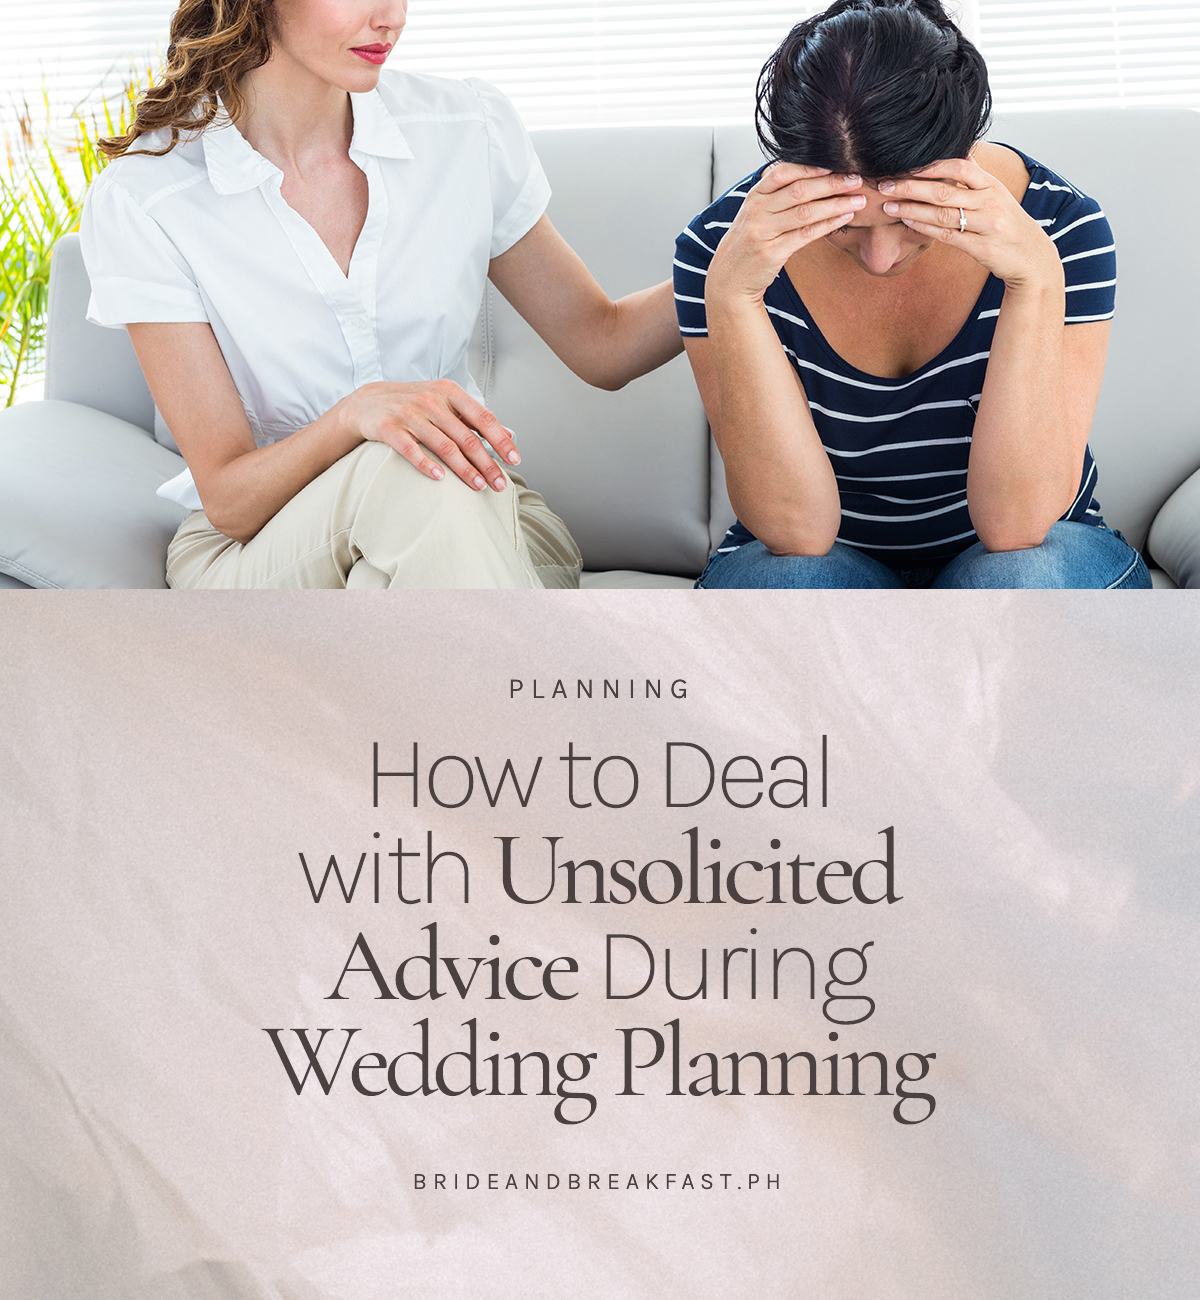 How to Deal with Unsolicited Advice During Wedding Planning